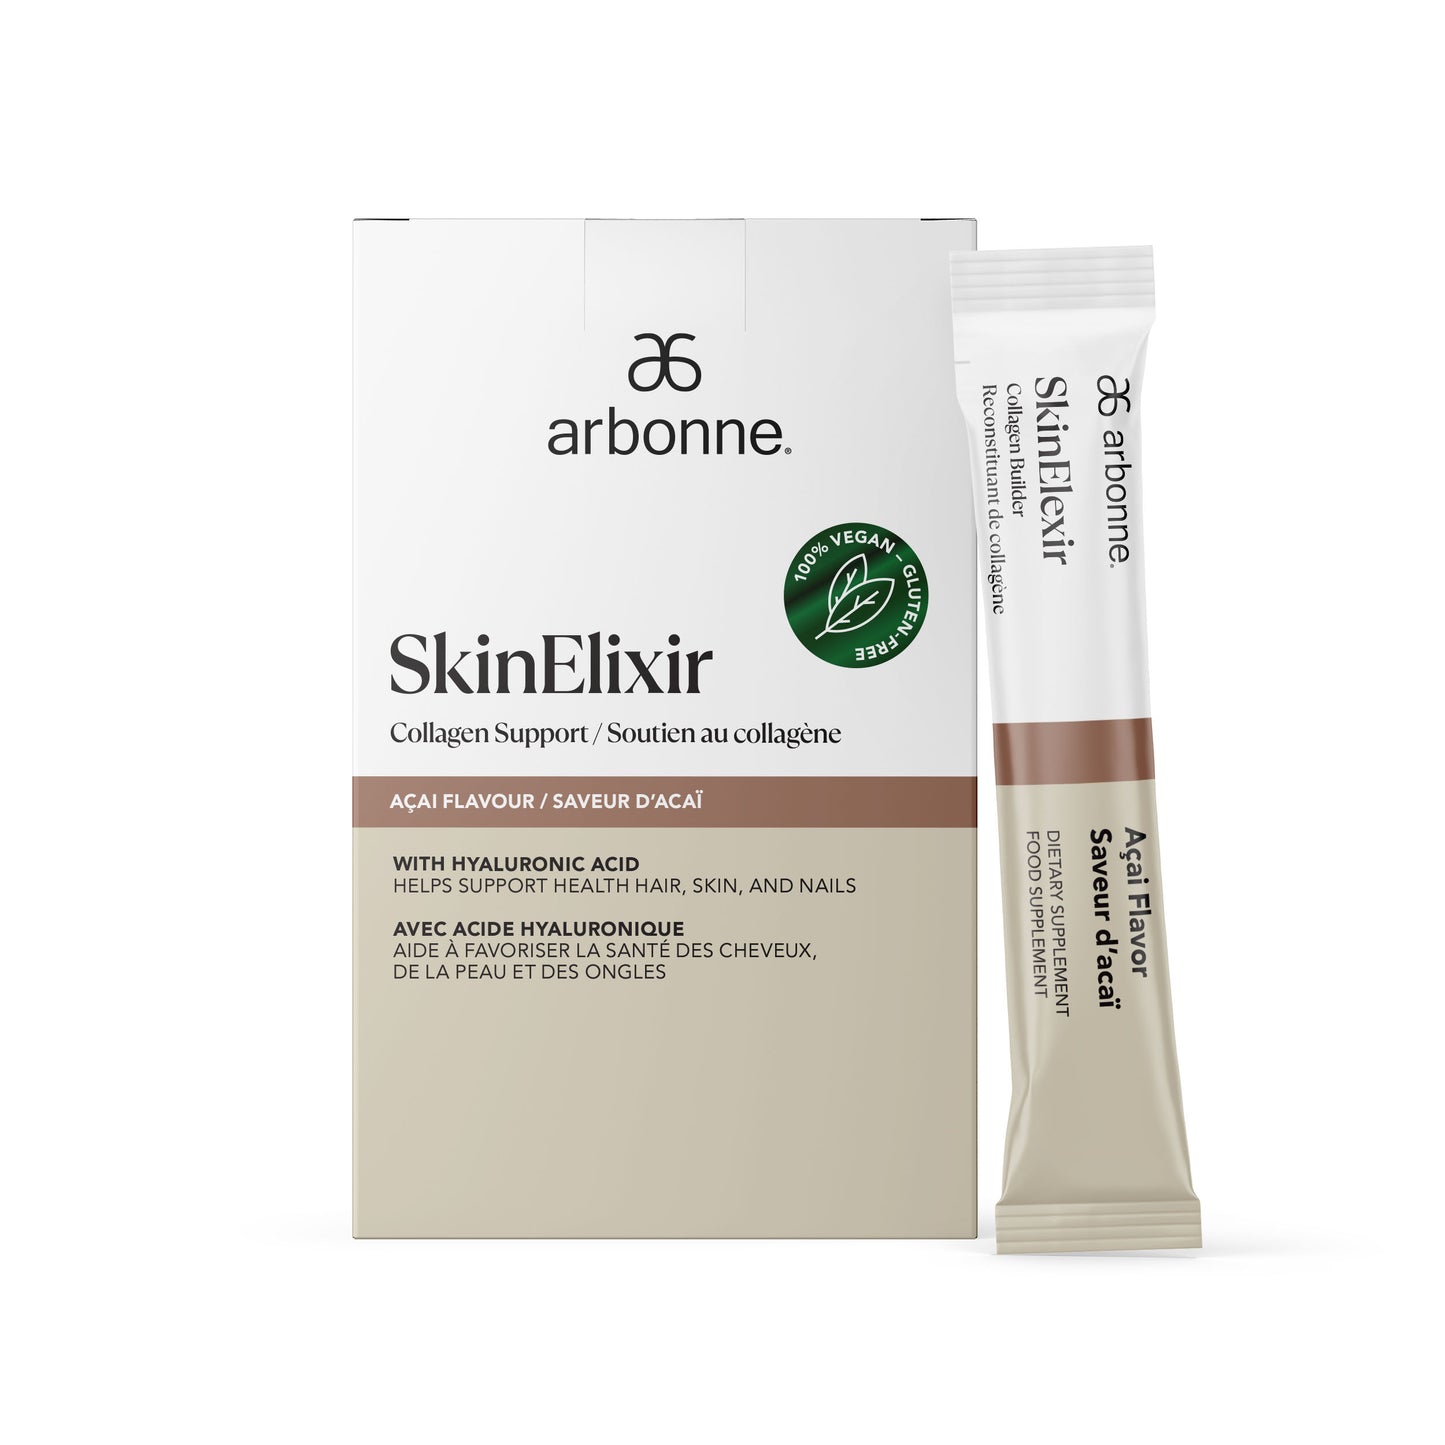 Arbonne SkinElixir Collagen Support in Açai Flavor by MindBodySkin, with hyaluronic acid for healthy hair, skin, and nails.